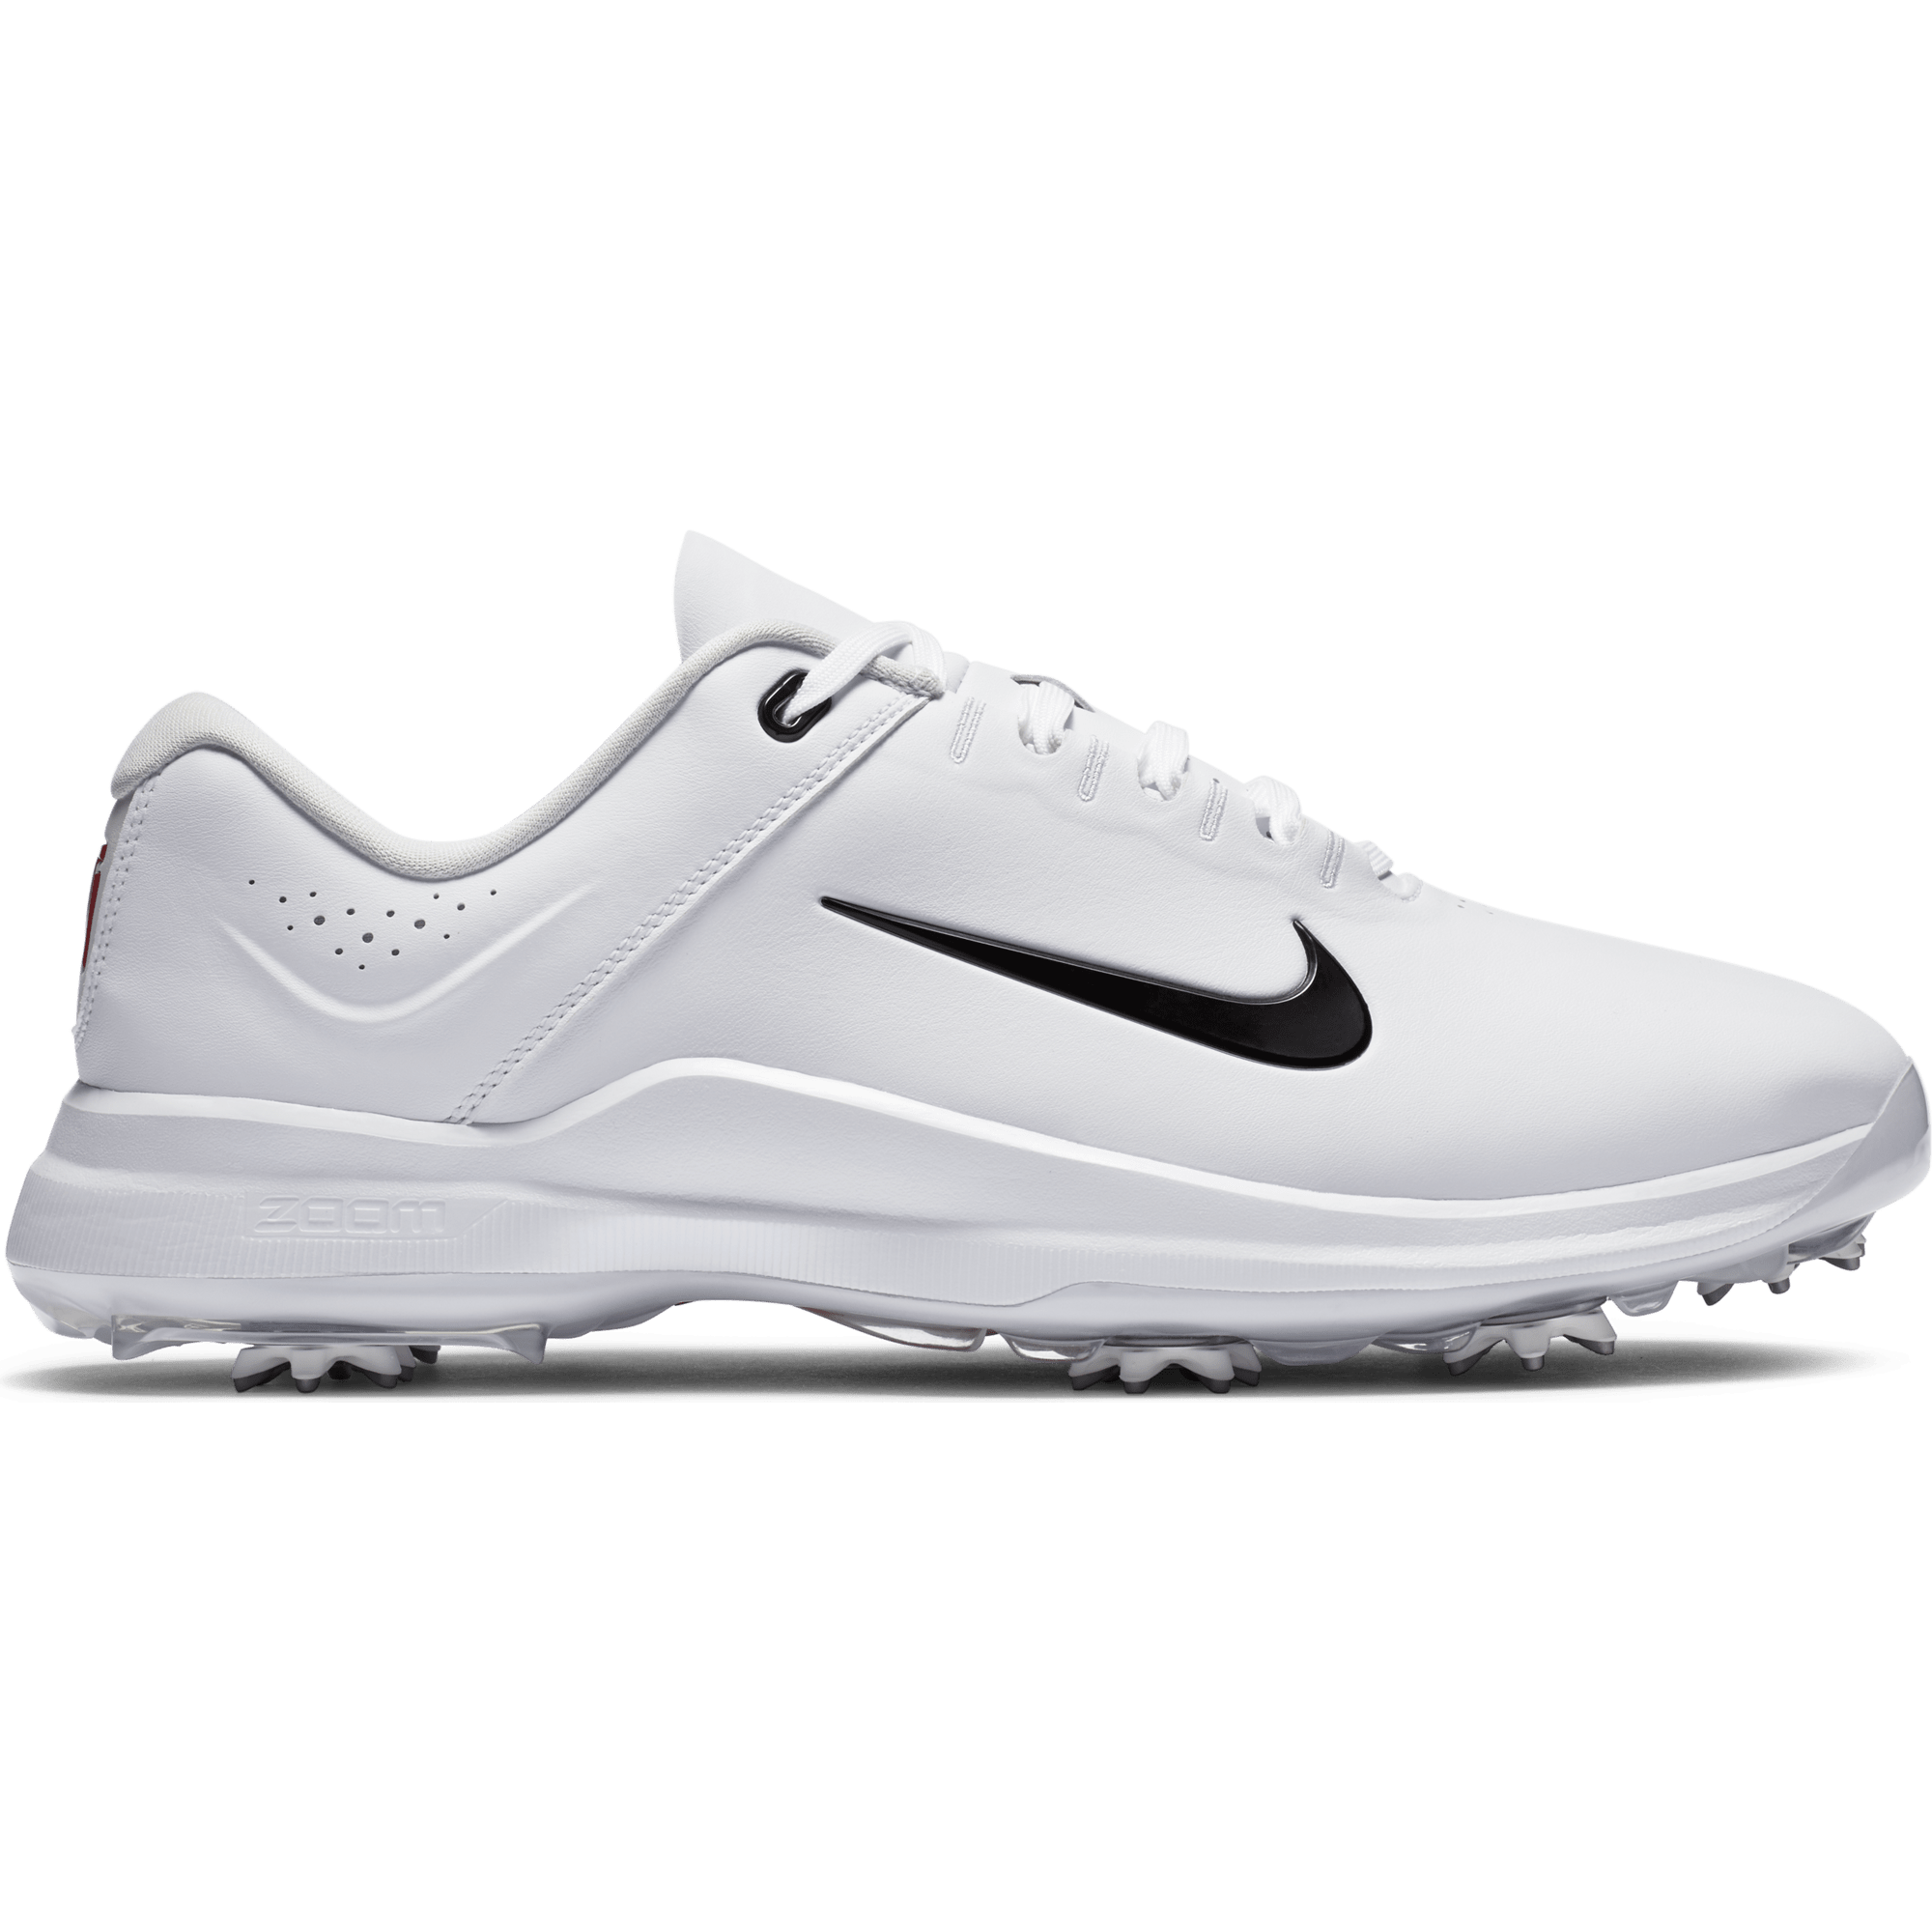 nike tiger woods golf shoes